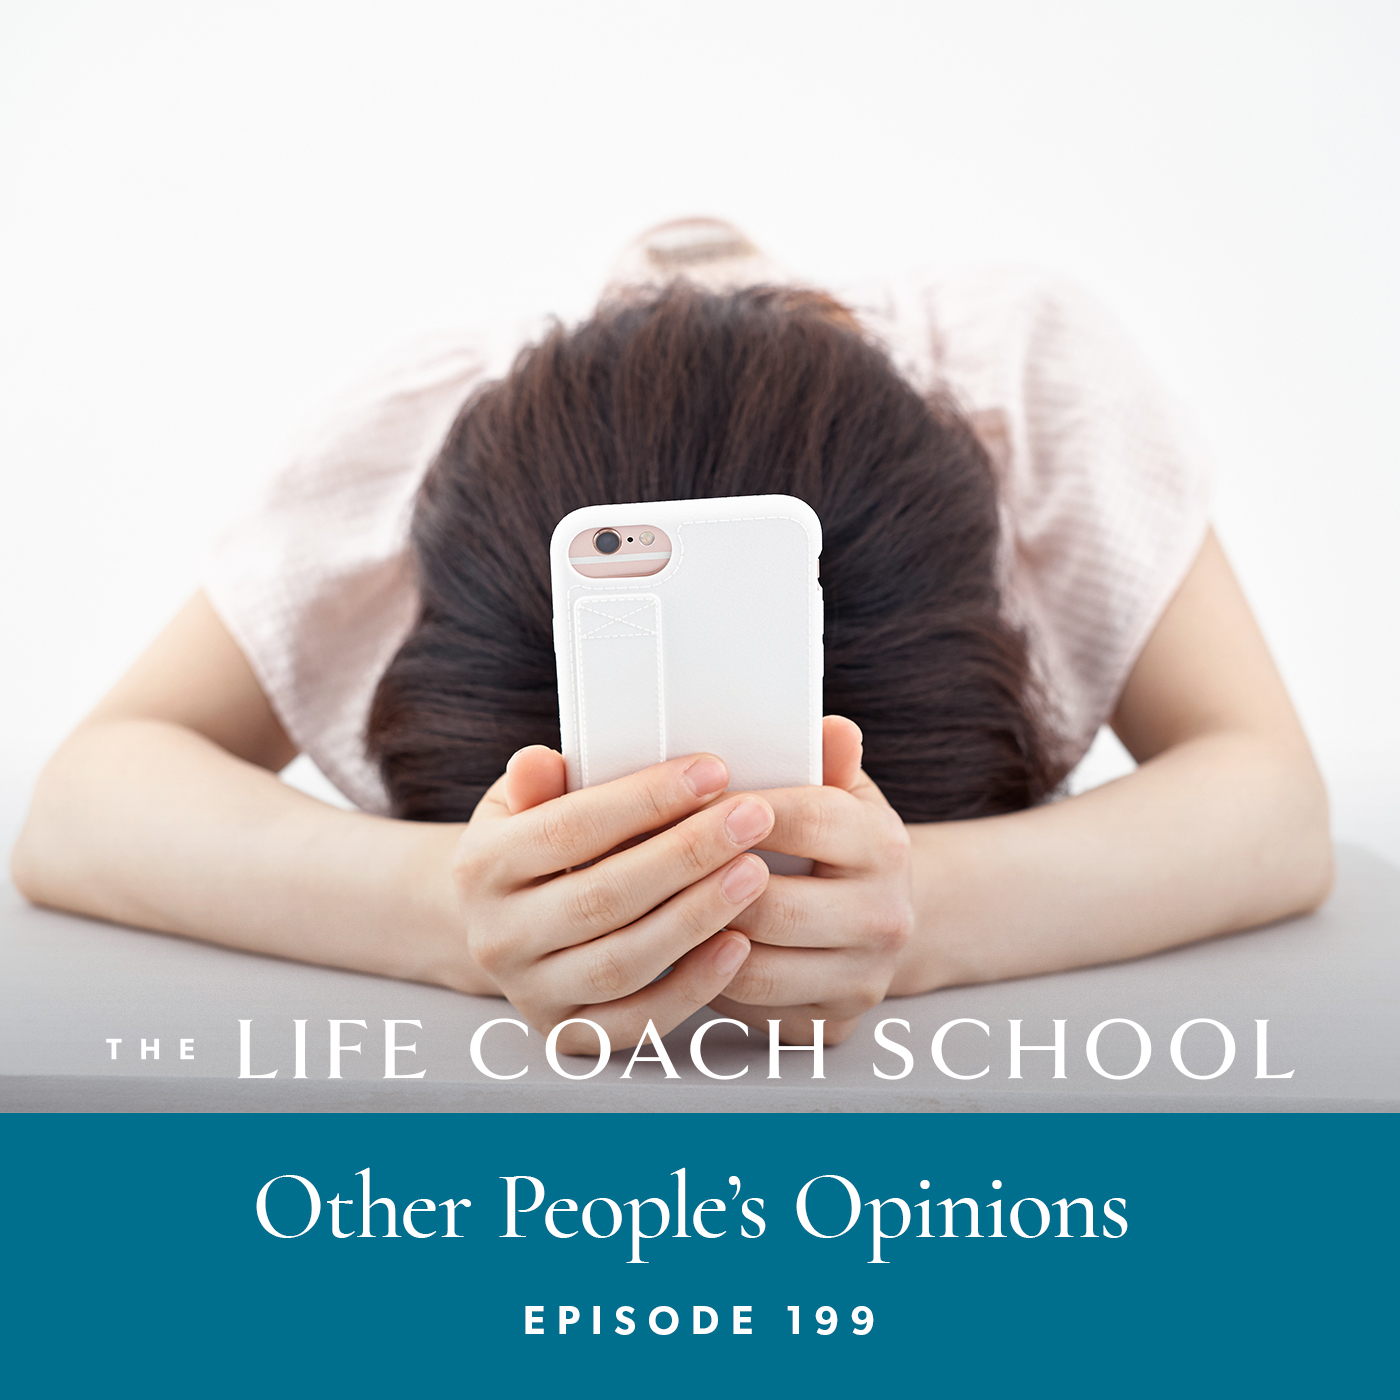 The Life Coach School Podcast with Brooke Castillo | Episode 199 | Other People’s Opinions